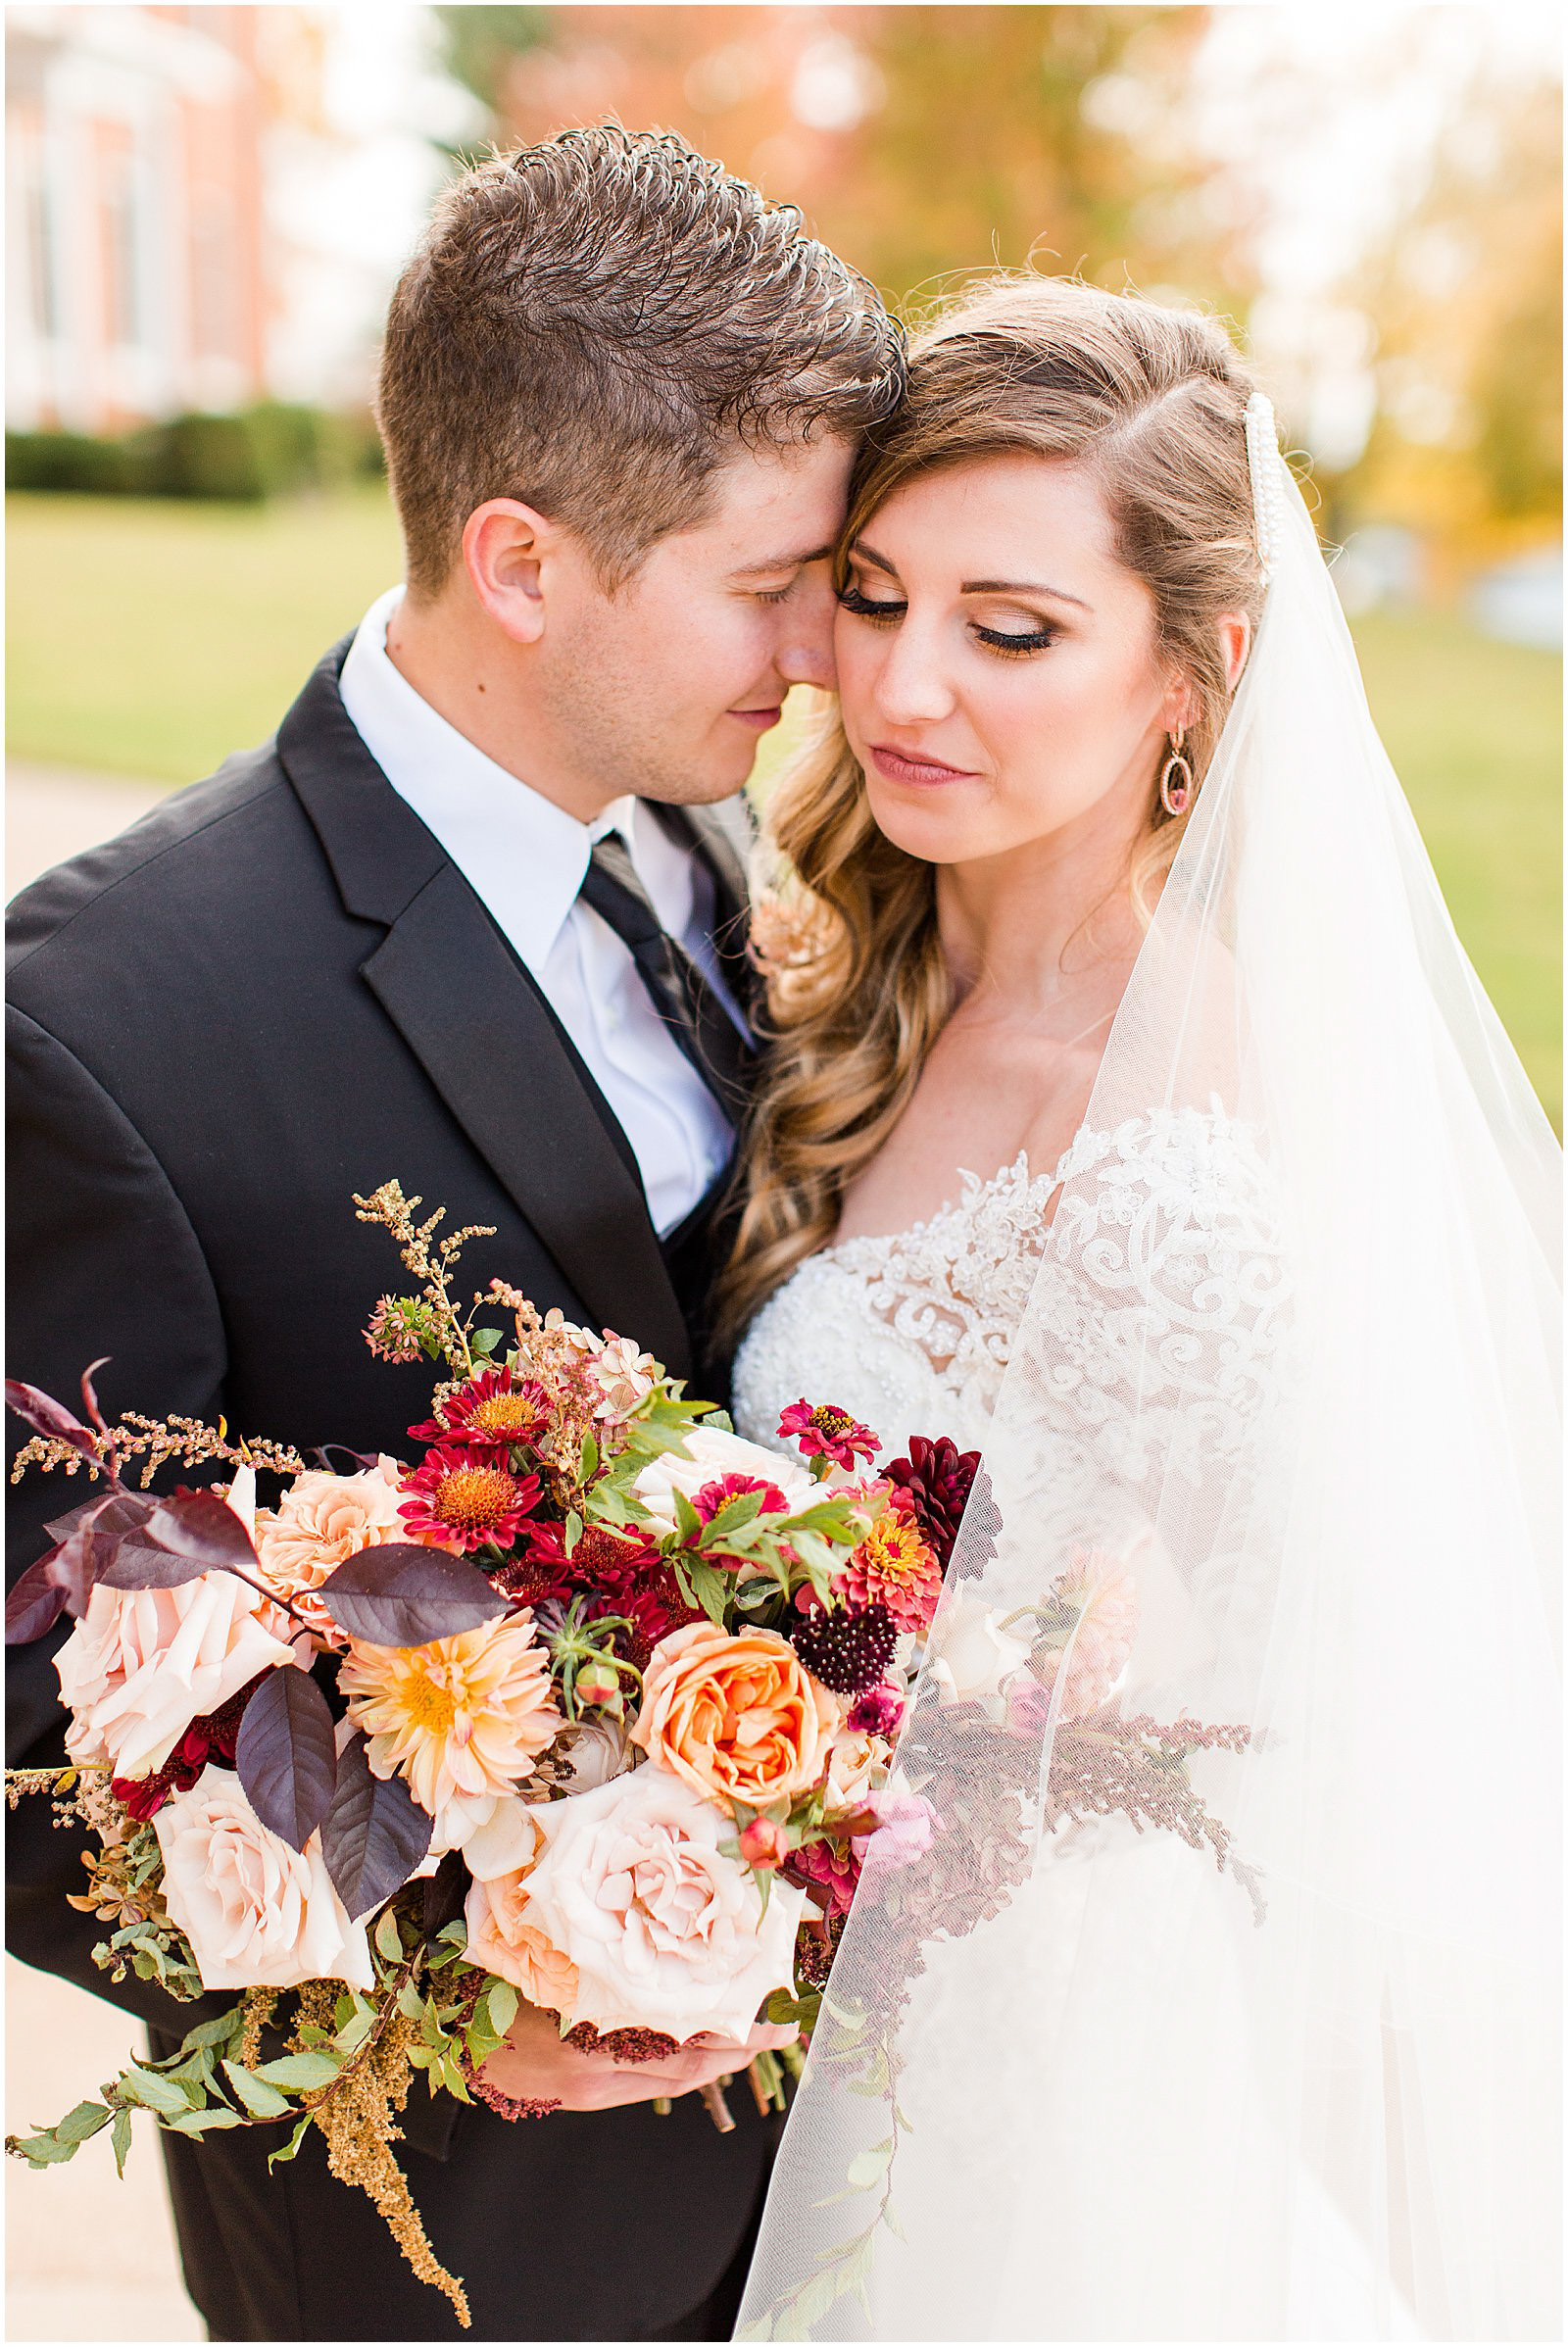 A Romantic Fall Wedding in Ferdinand, IN | Tori and Kyle | Bret and Brandie Photography 0114.jpg